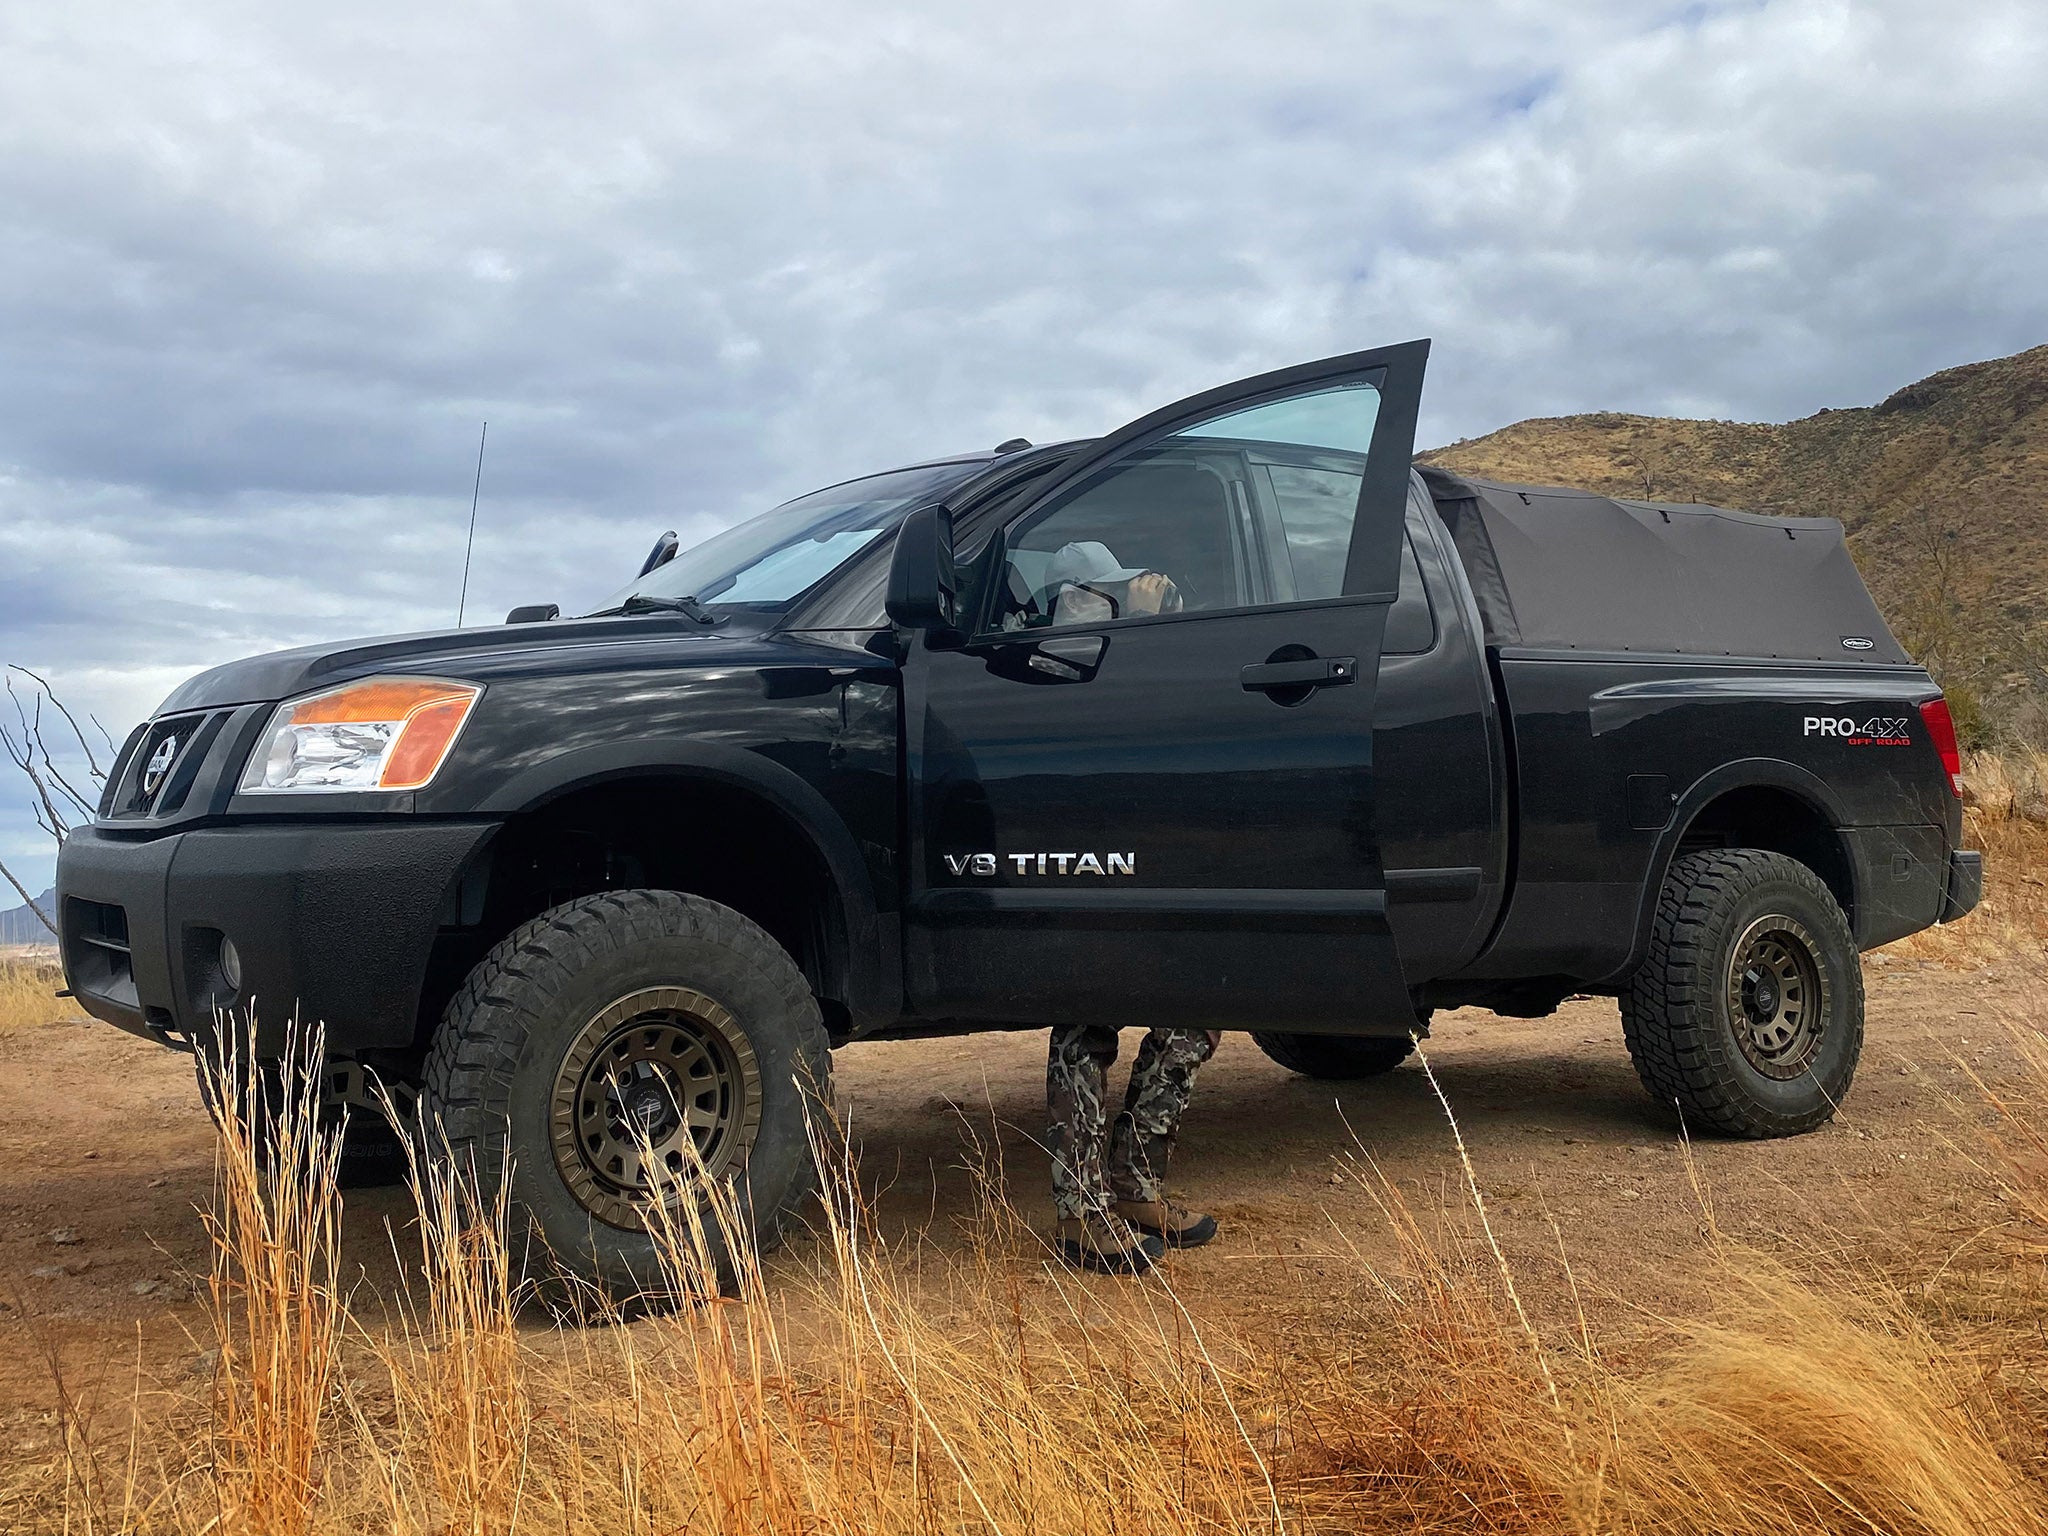 overland sector wheels rig gallery Joey's Nissan Titan Pro 4x on 17x9 satin bronze venture wheels 3 inch lift 34 inch tires custom bumper off-road lighting bed topper camping supplies roof rack and more.